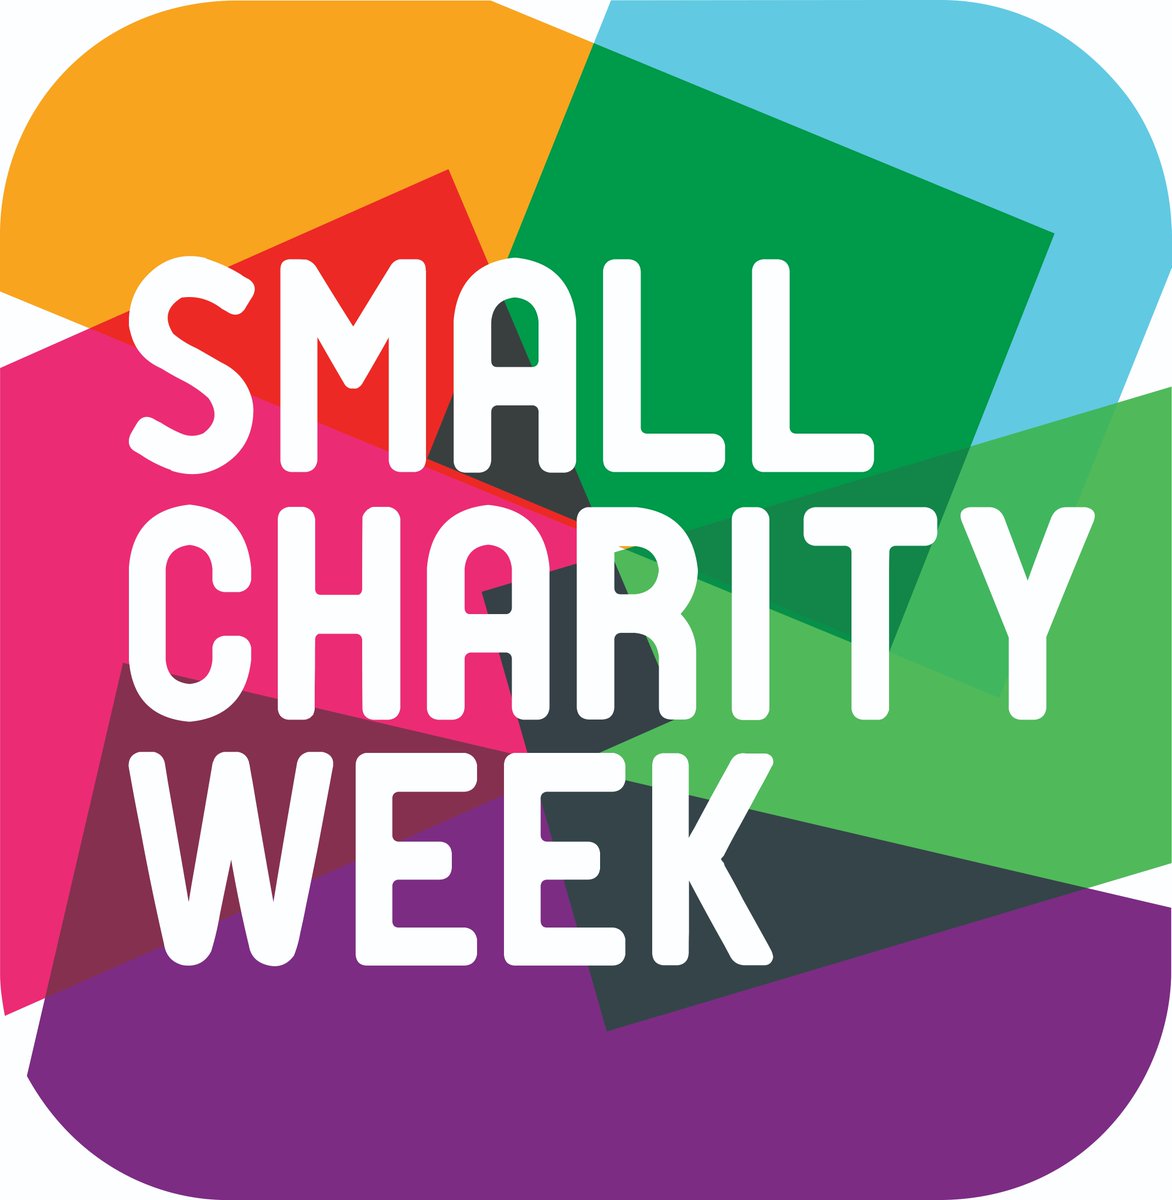 Have you registered for all the free support on offer during upcoming #SmallCharityWeek?smallcharityweek.com 
#smallcharitiestogether
#Thirdsector org operating or based in #Coventry? #voluntaryactioncoventry strengthens the sector here. Join: vacoventry.org.uk/page/vcse-memb…